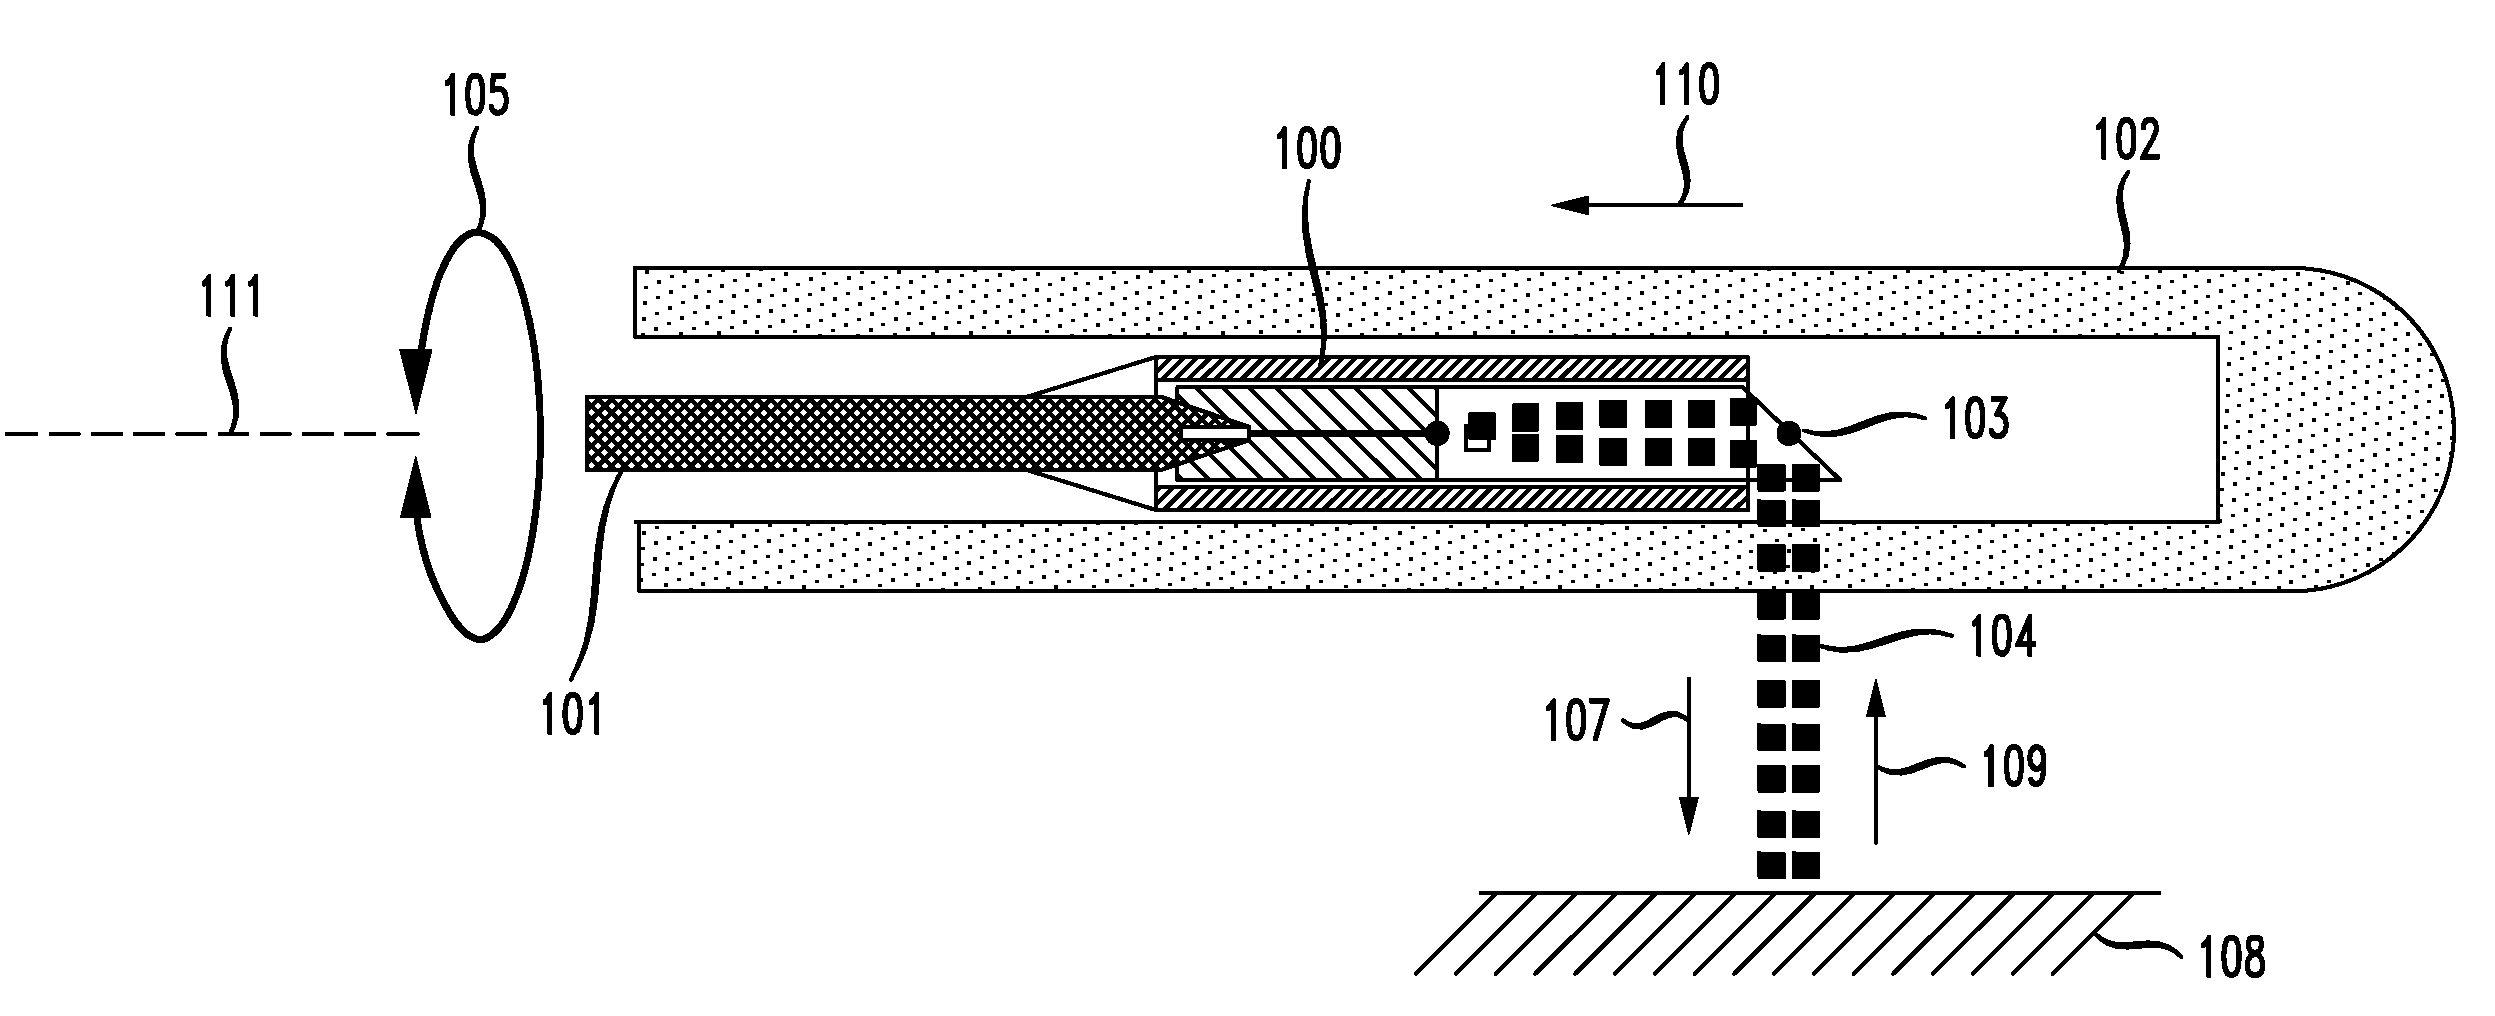 Method and apparatus for inner wall extraction and stent strut detection using intravascular optical coherence tomography imaging